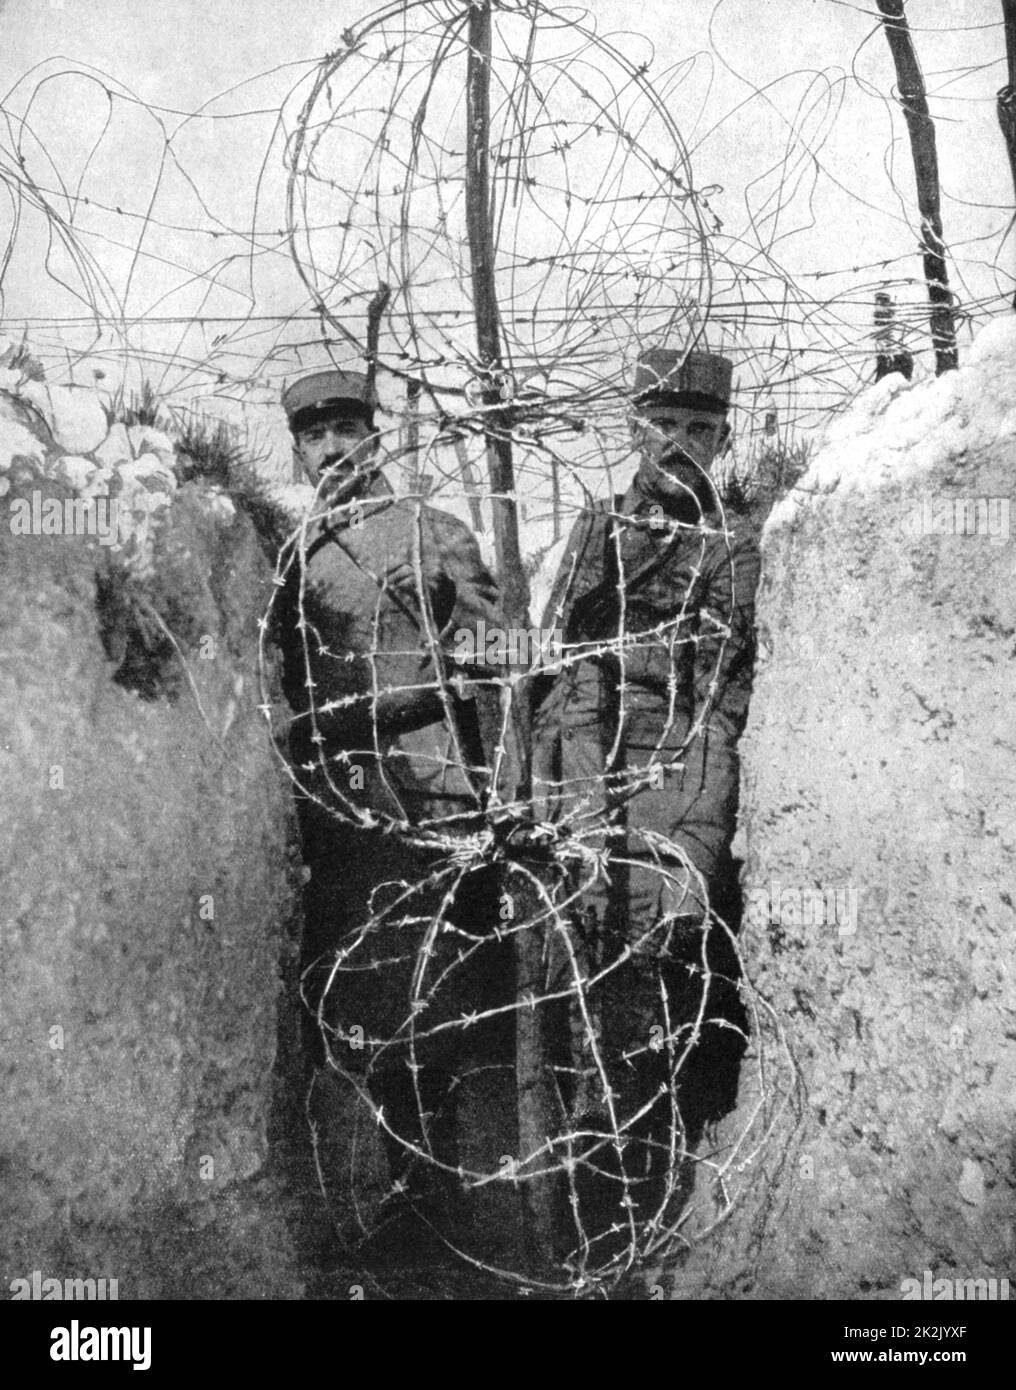 World War I 1914-1918:  Barbed wire entaglements protecting French soldiers in their trenches.  From  'Le Pays de France', 2 September 1915. Stock Photo